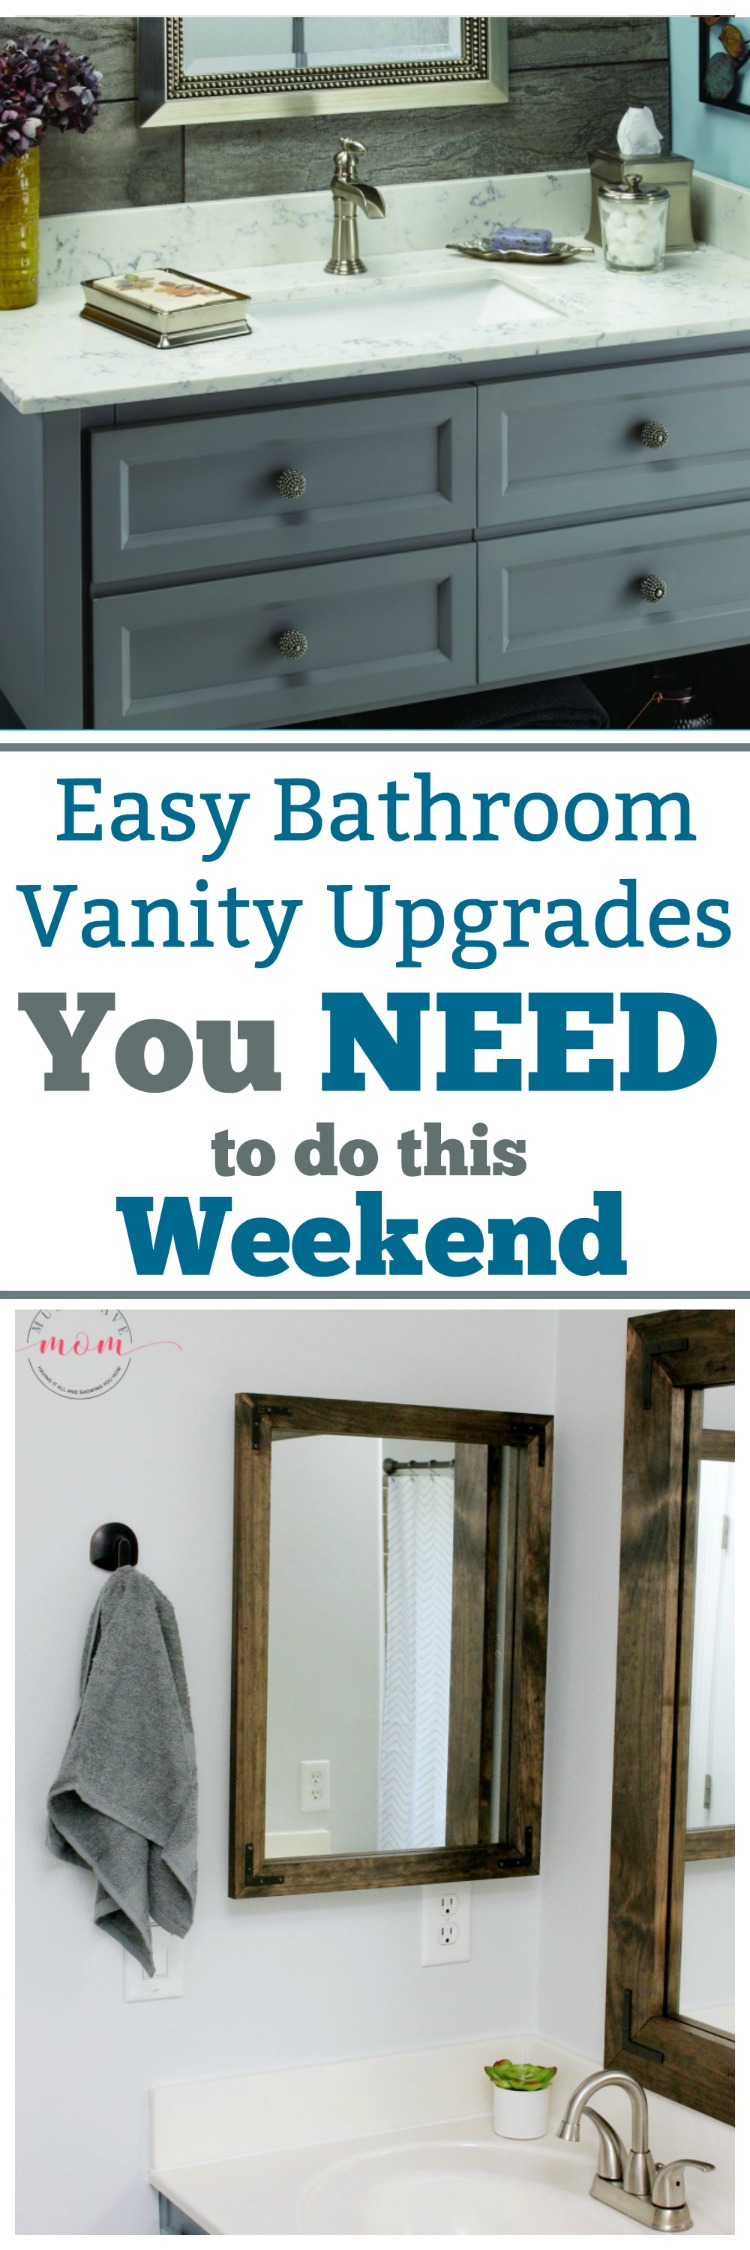 Easy bathroom vanity upgrades you NEED to do this weekend! DIY bathroom projects for farmhouse style bathroom ideas.